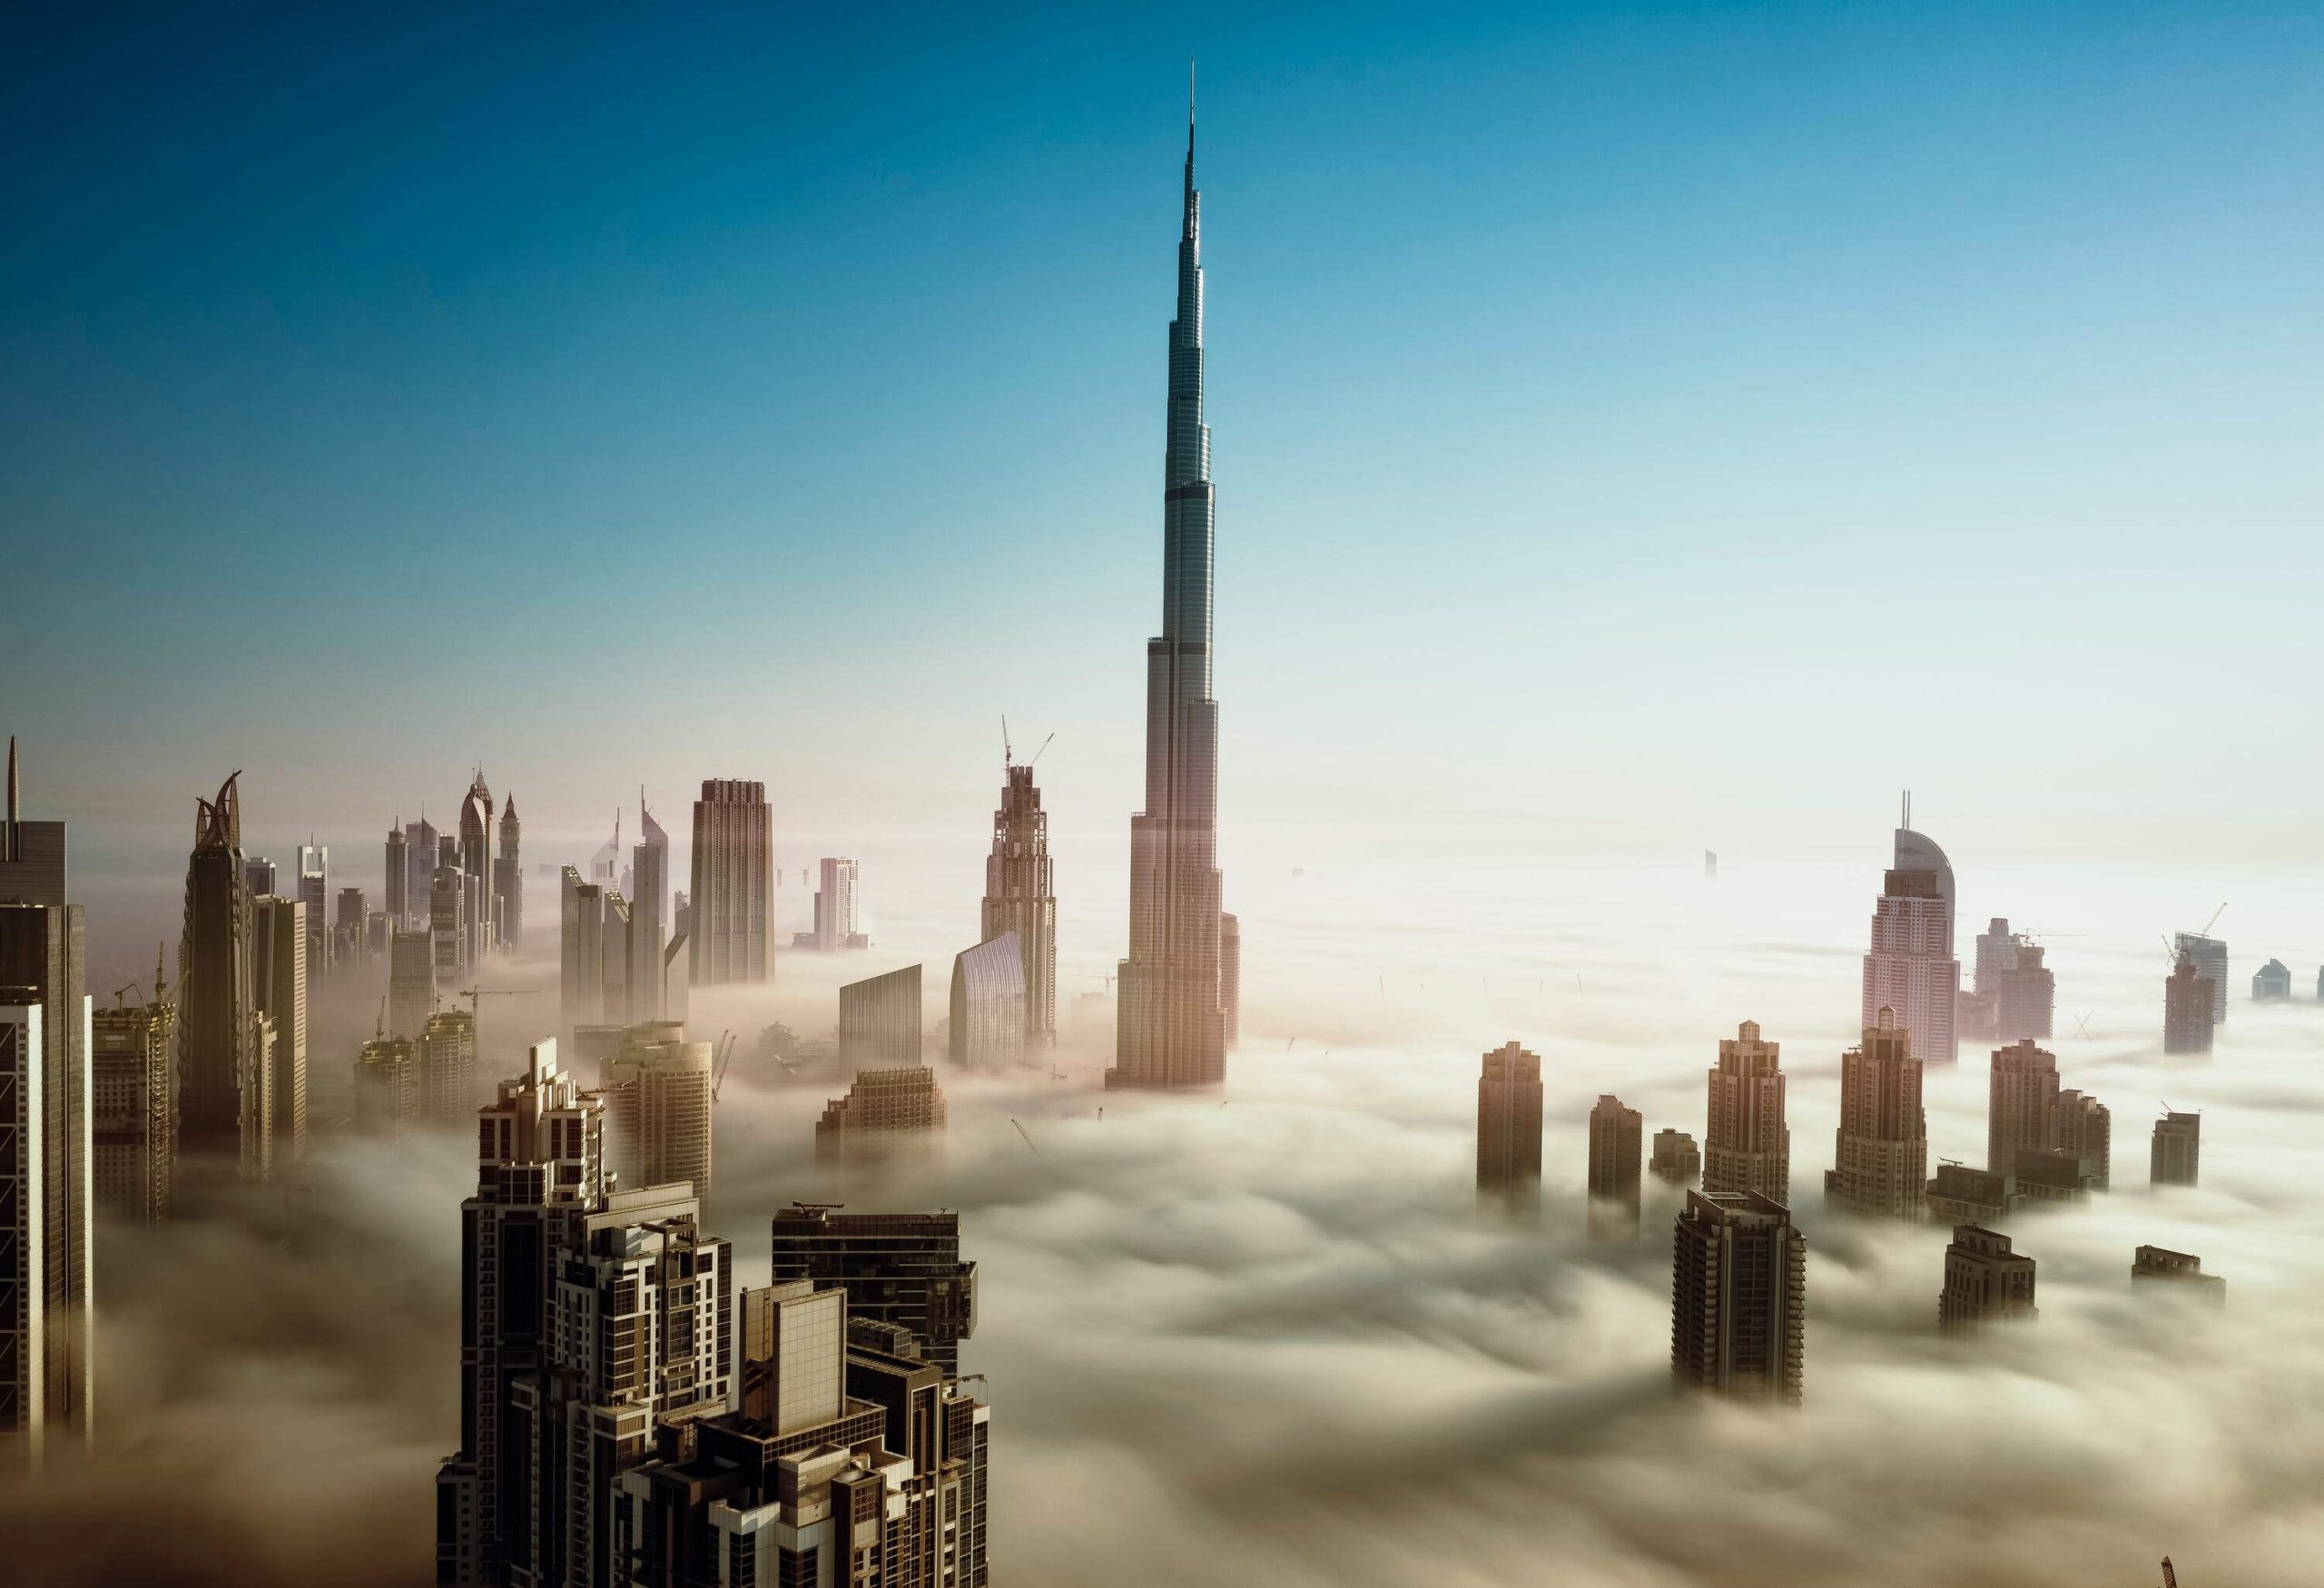 Dubai's skyline is dominated by modern skyscrapers, including the world's tallest building, the Burj Khalifa, in the early morning fog.